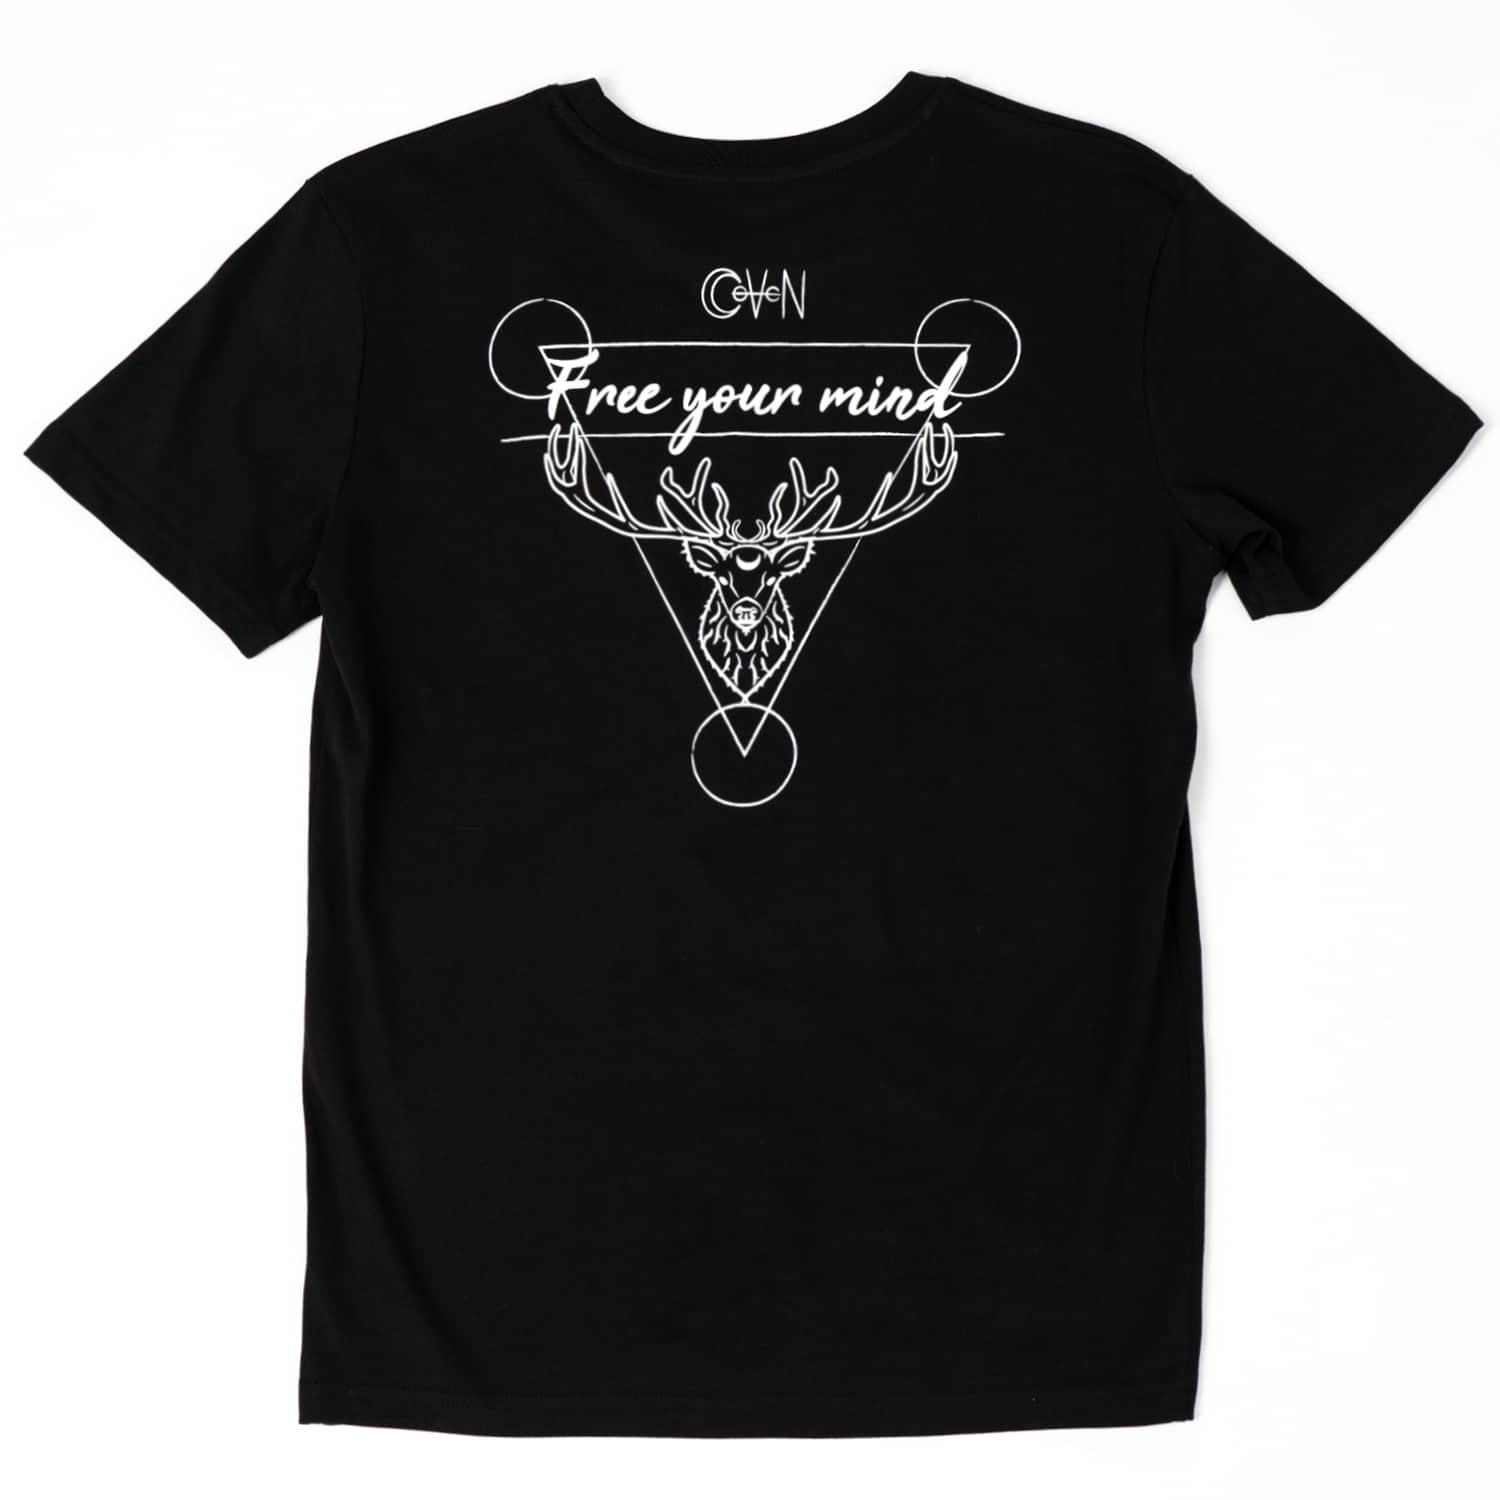 CoVeN t-shirt terre